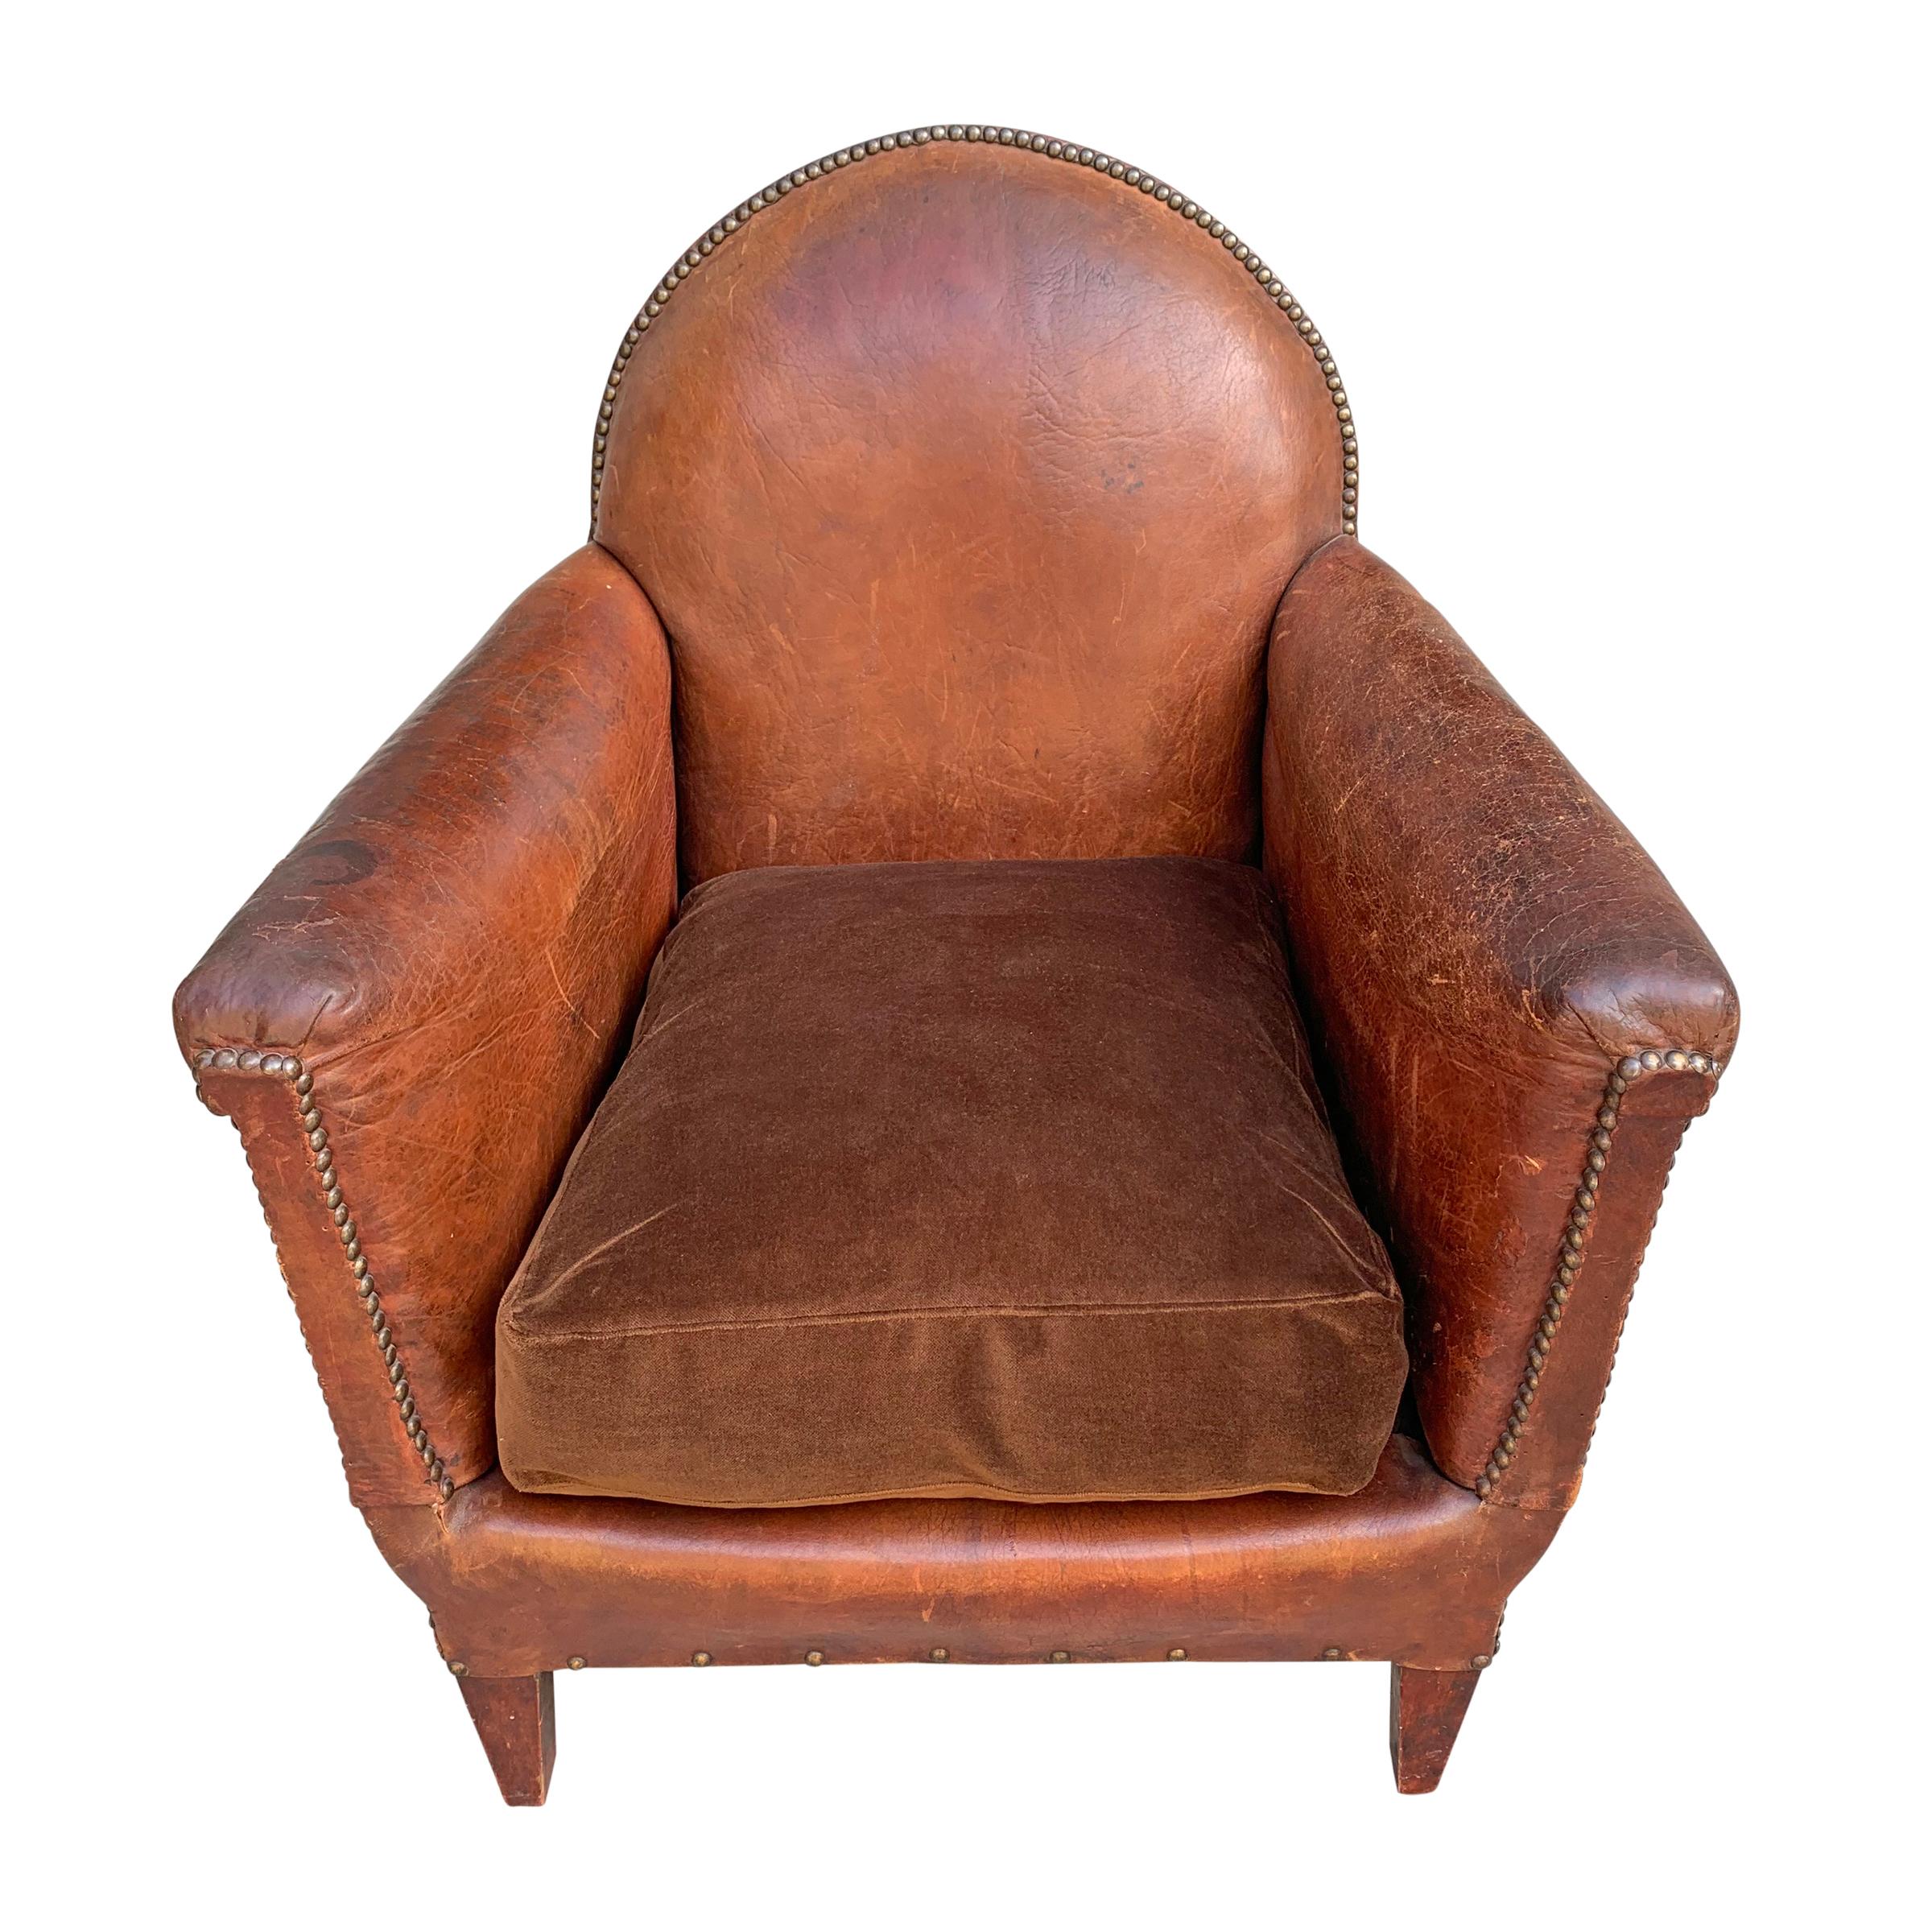 A handsome early 20th century French leather club chair with a tall round back, nailhead trim, and a down filled brown velvet seat.